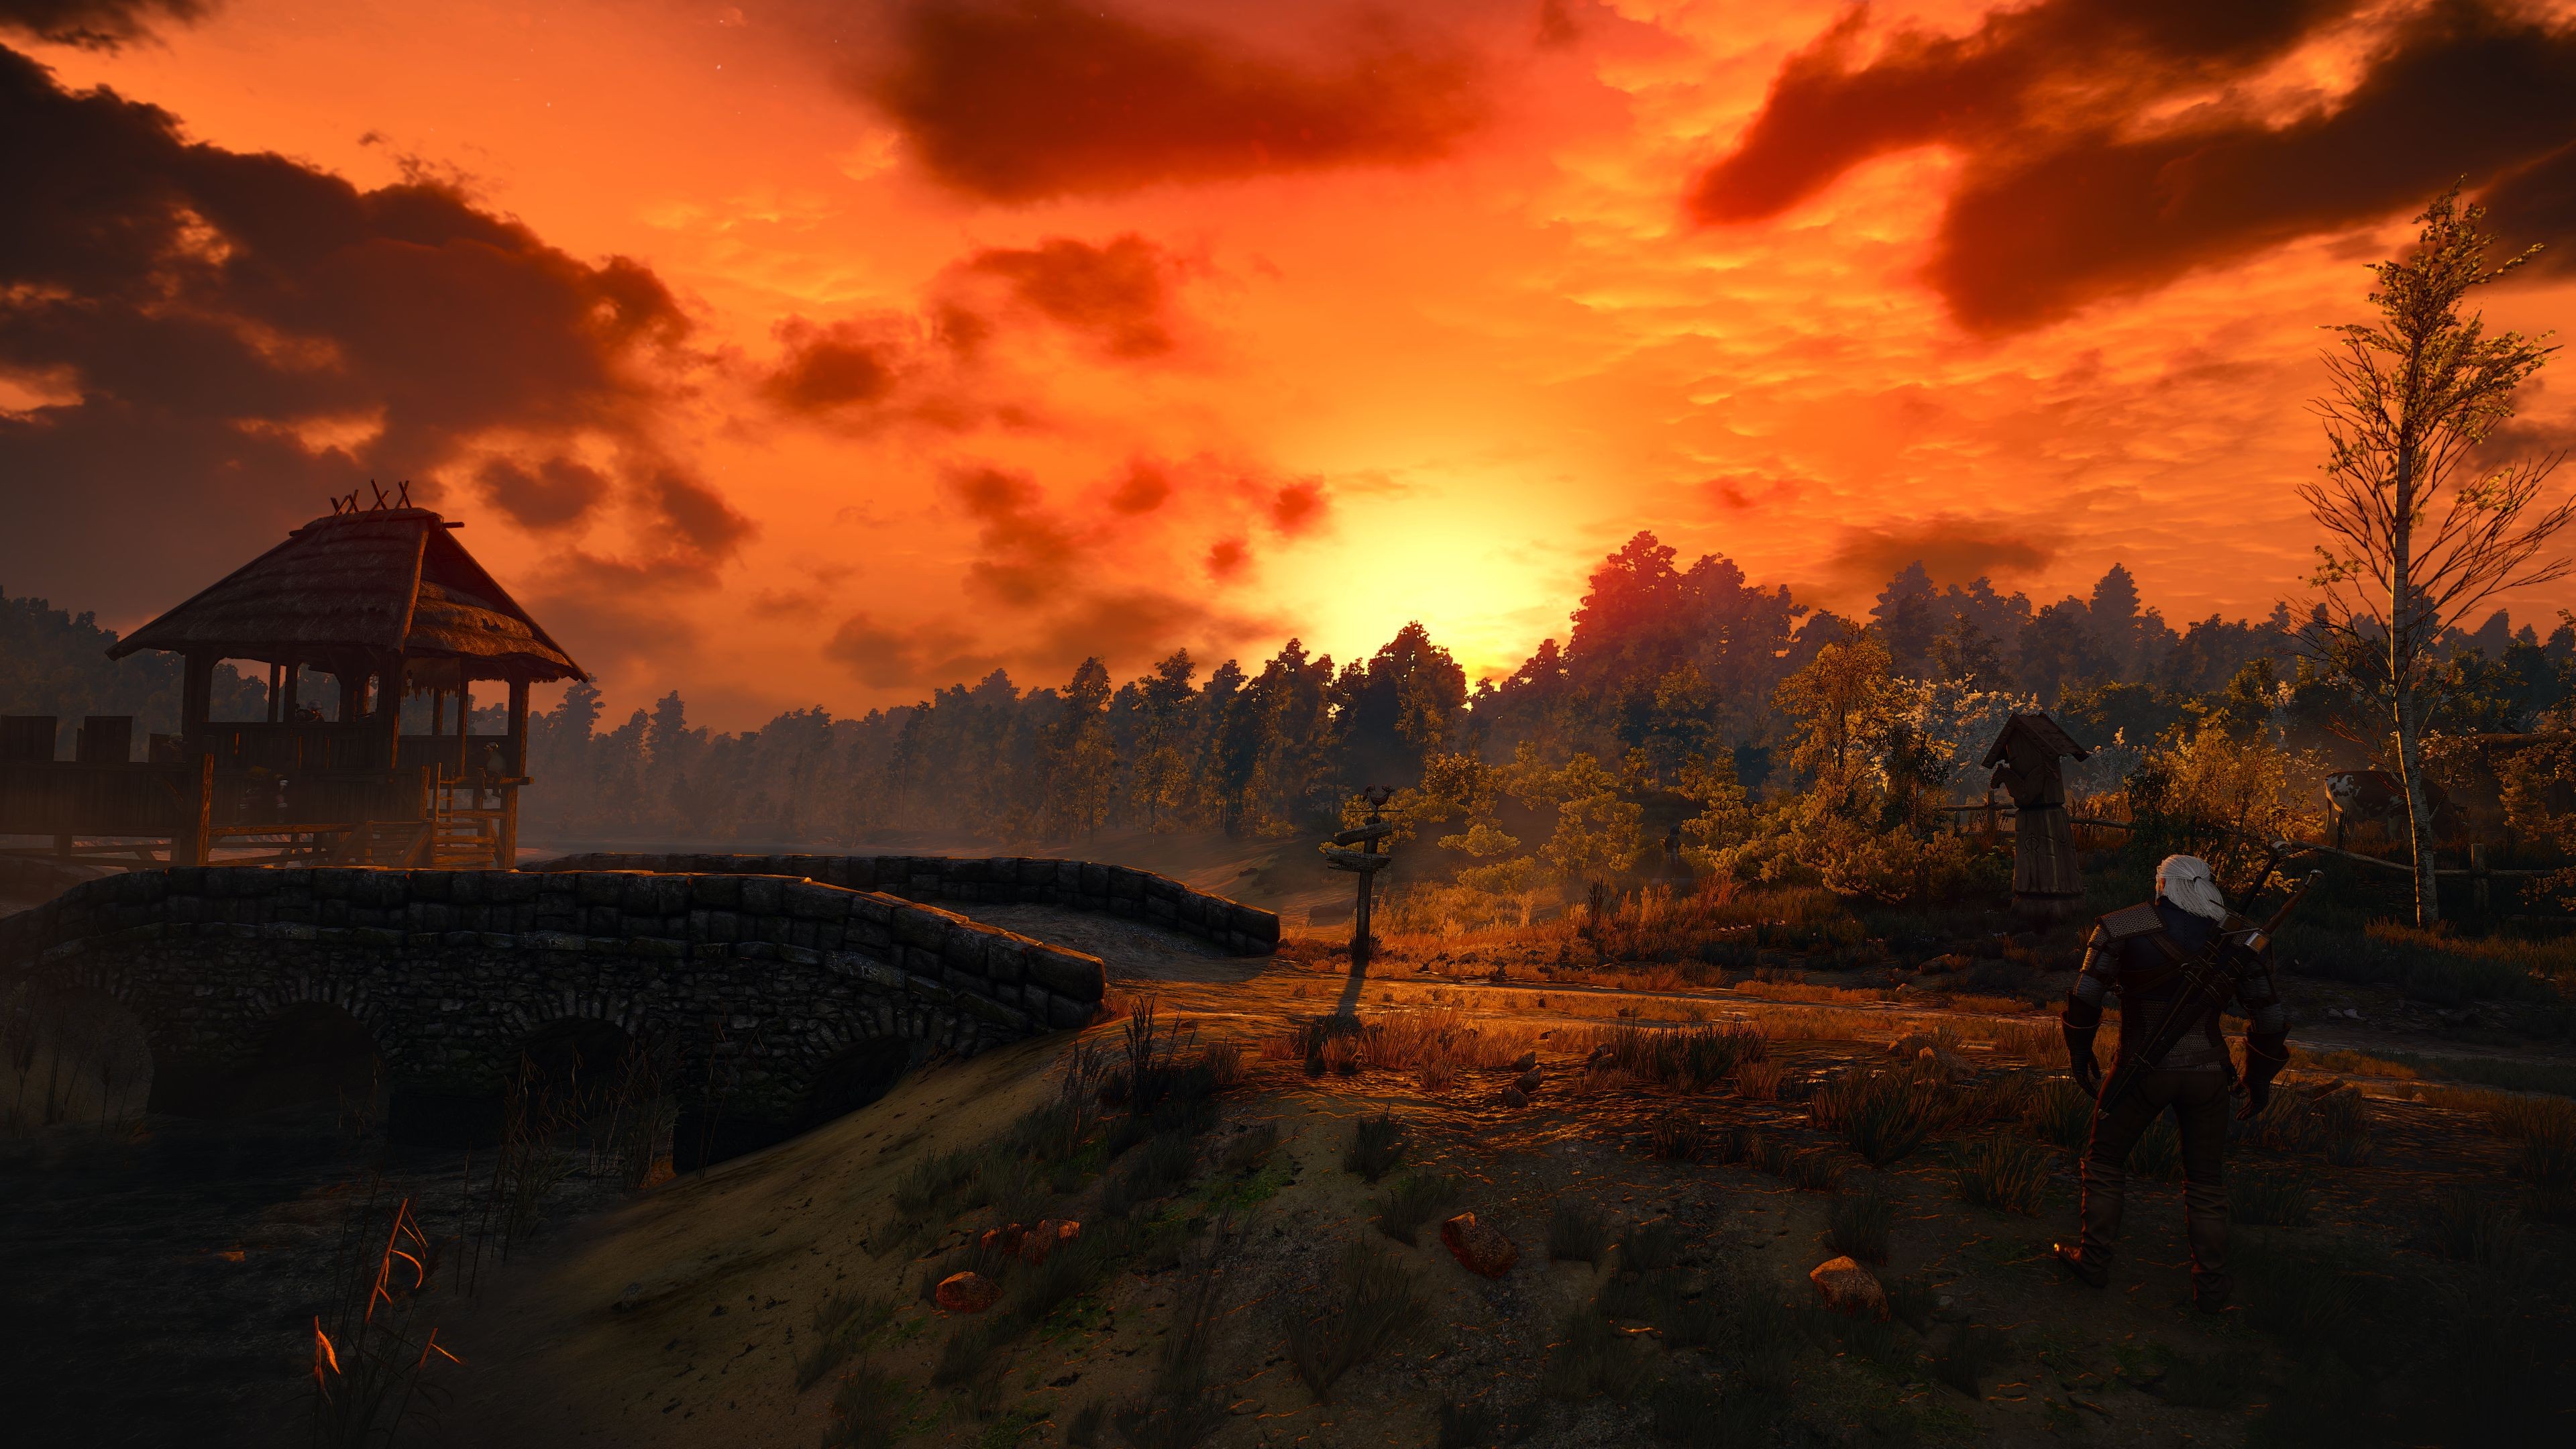 General 3840x2160 The Witcher 3: Wild Hunt screen shot Nvidia Ansel The Witcher Velen CD Projekt RED video game landscape orange sky video games PC gaming RPG